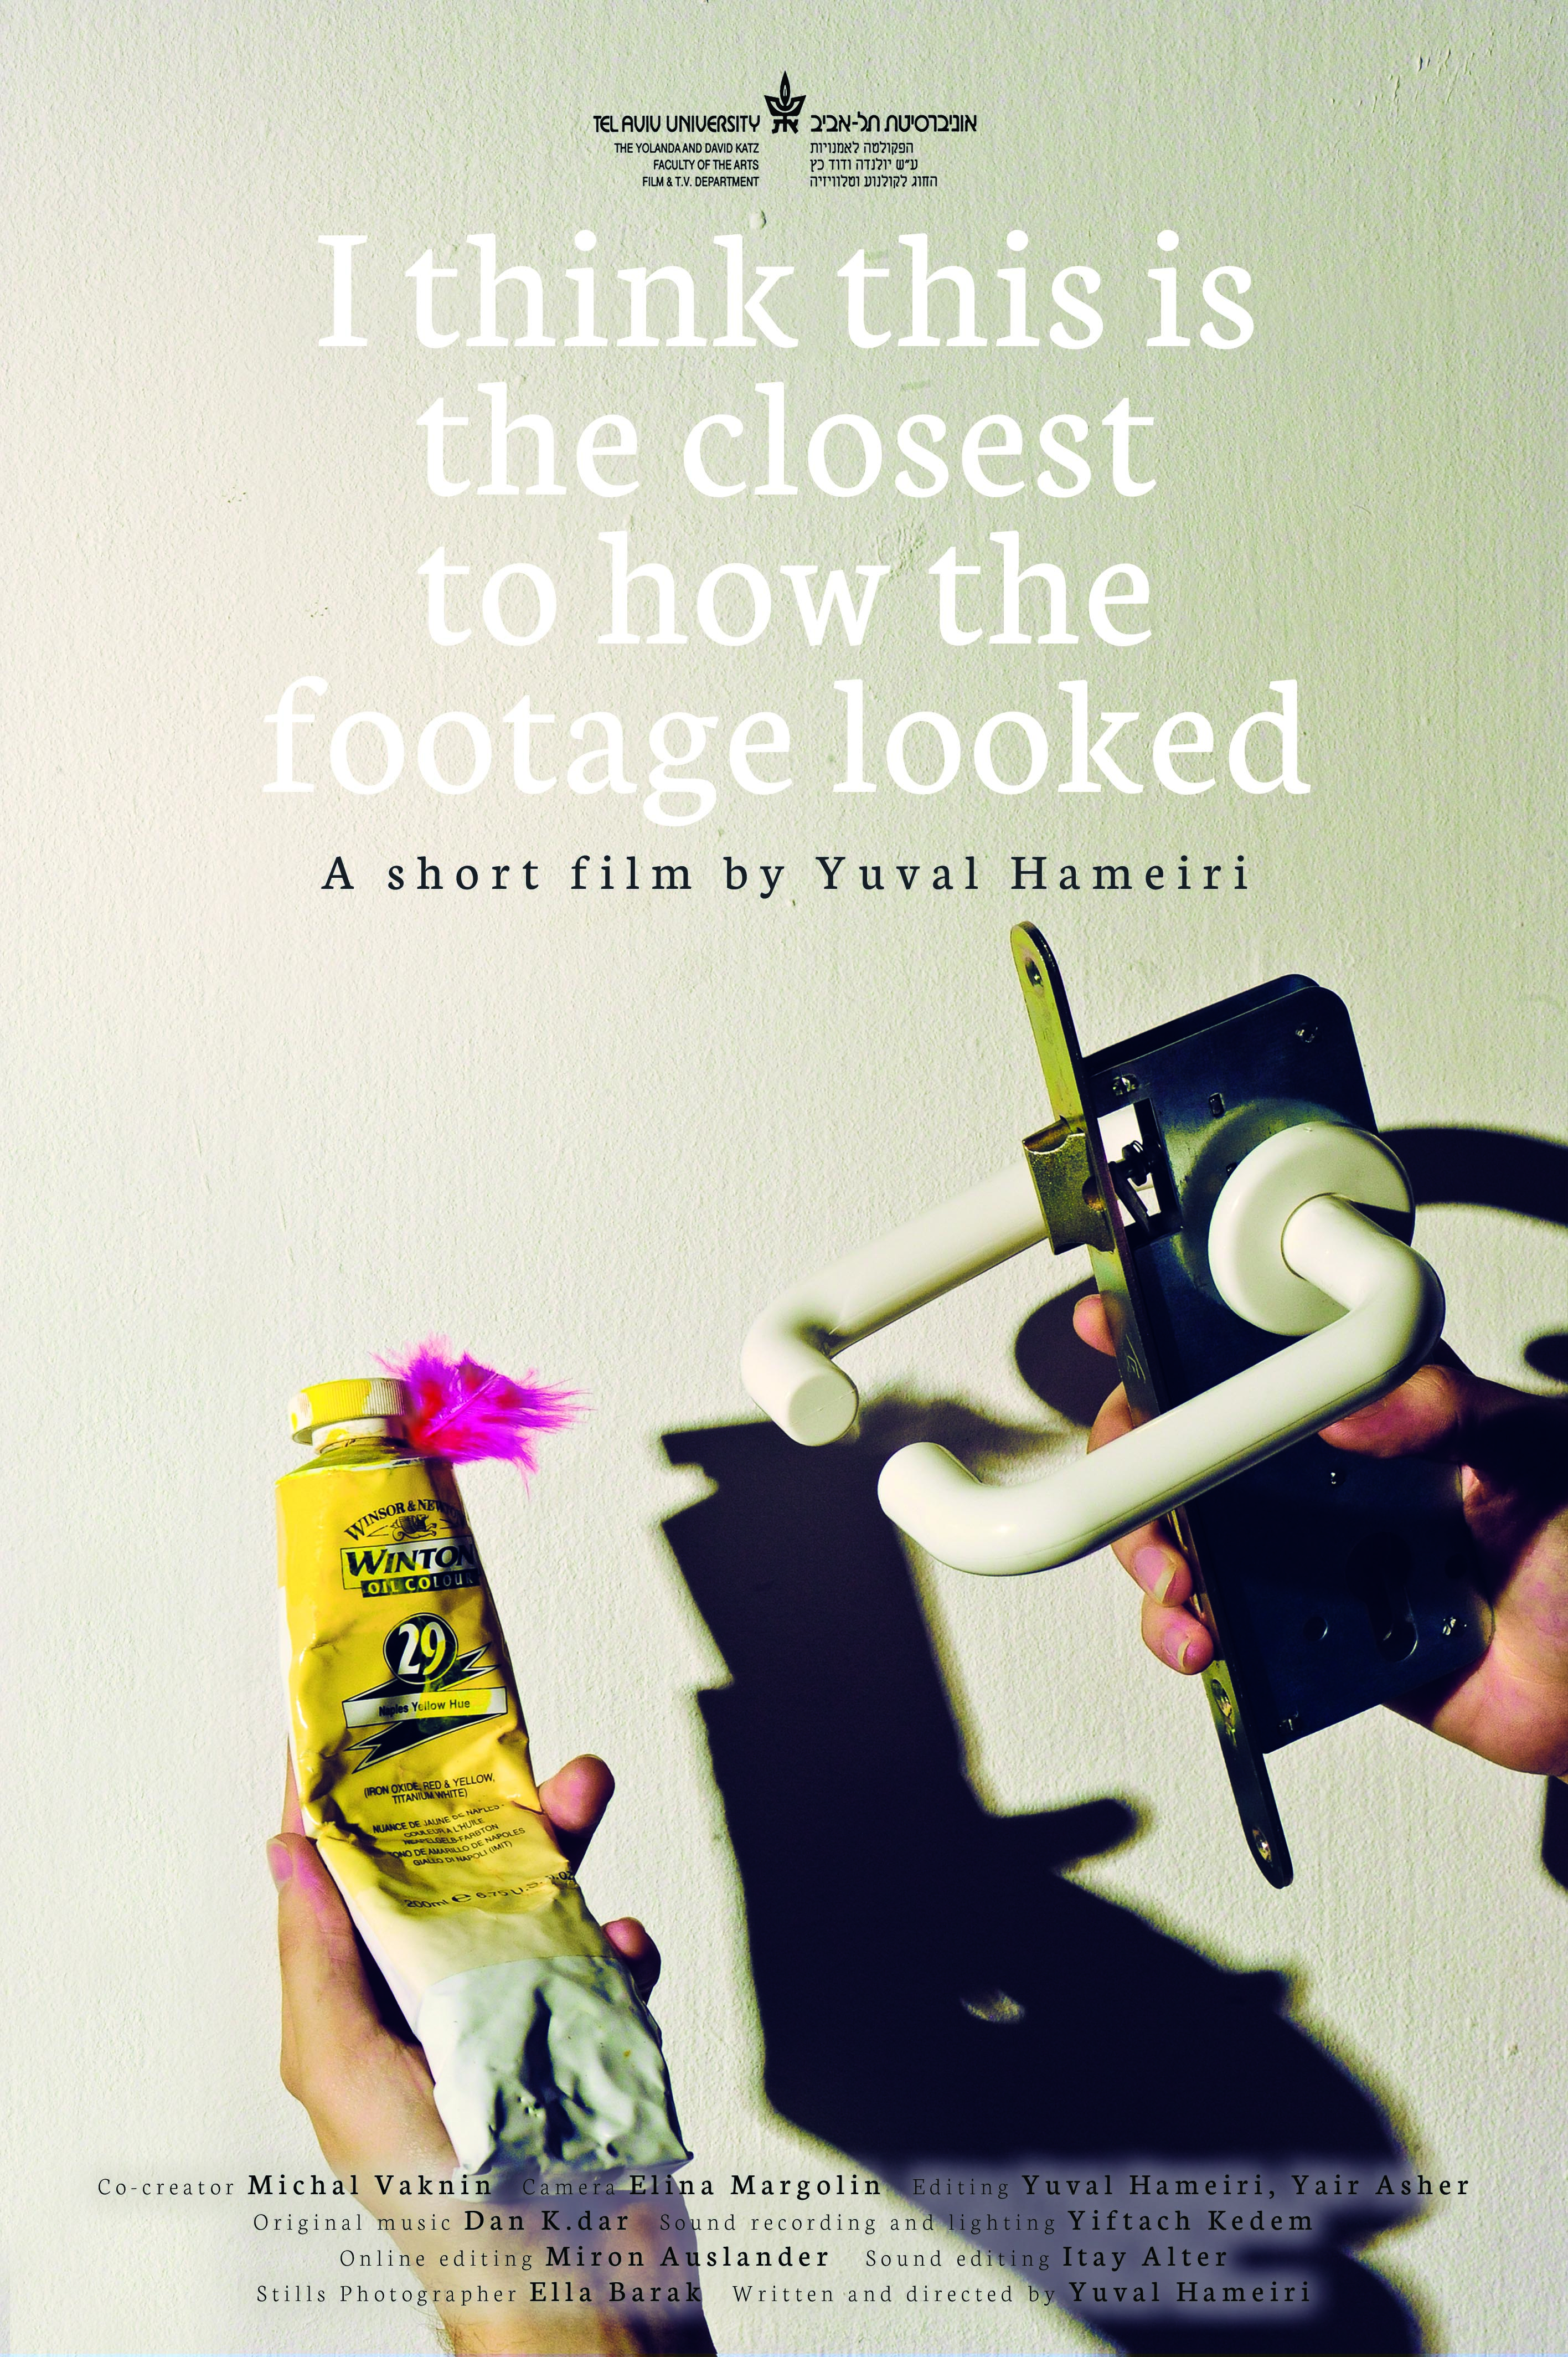 The poster for "I Think This Is the Closest To How the Footage Looked"